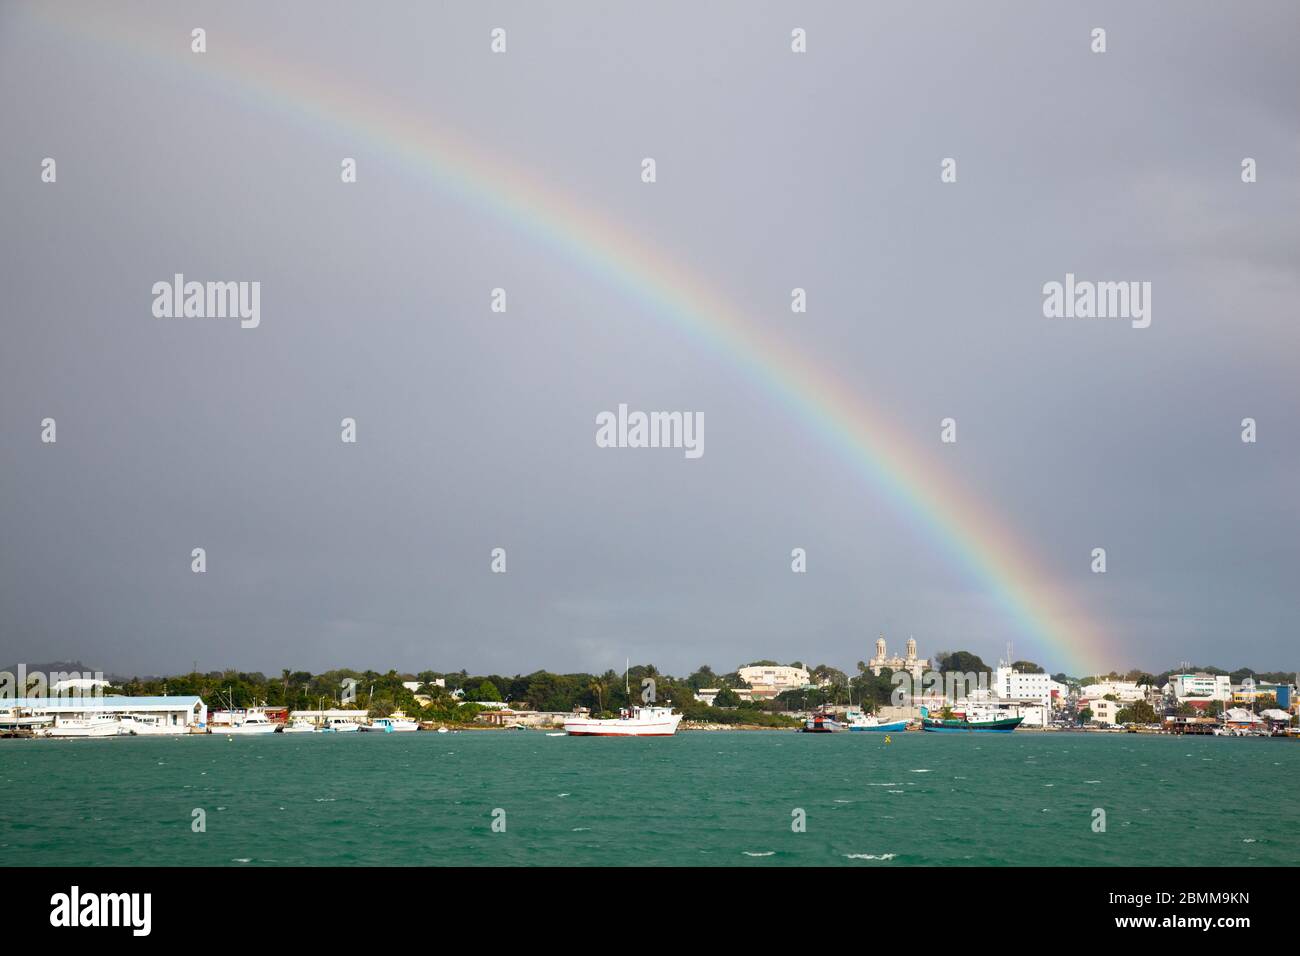 St. John's, the capital of Antigua seen from a boat with a rainbow. Stock Photo